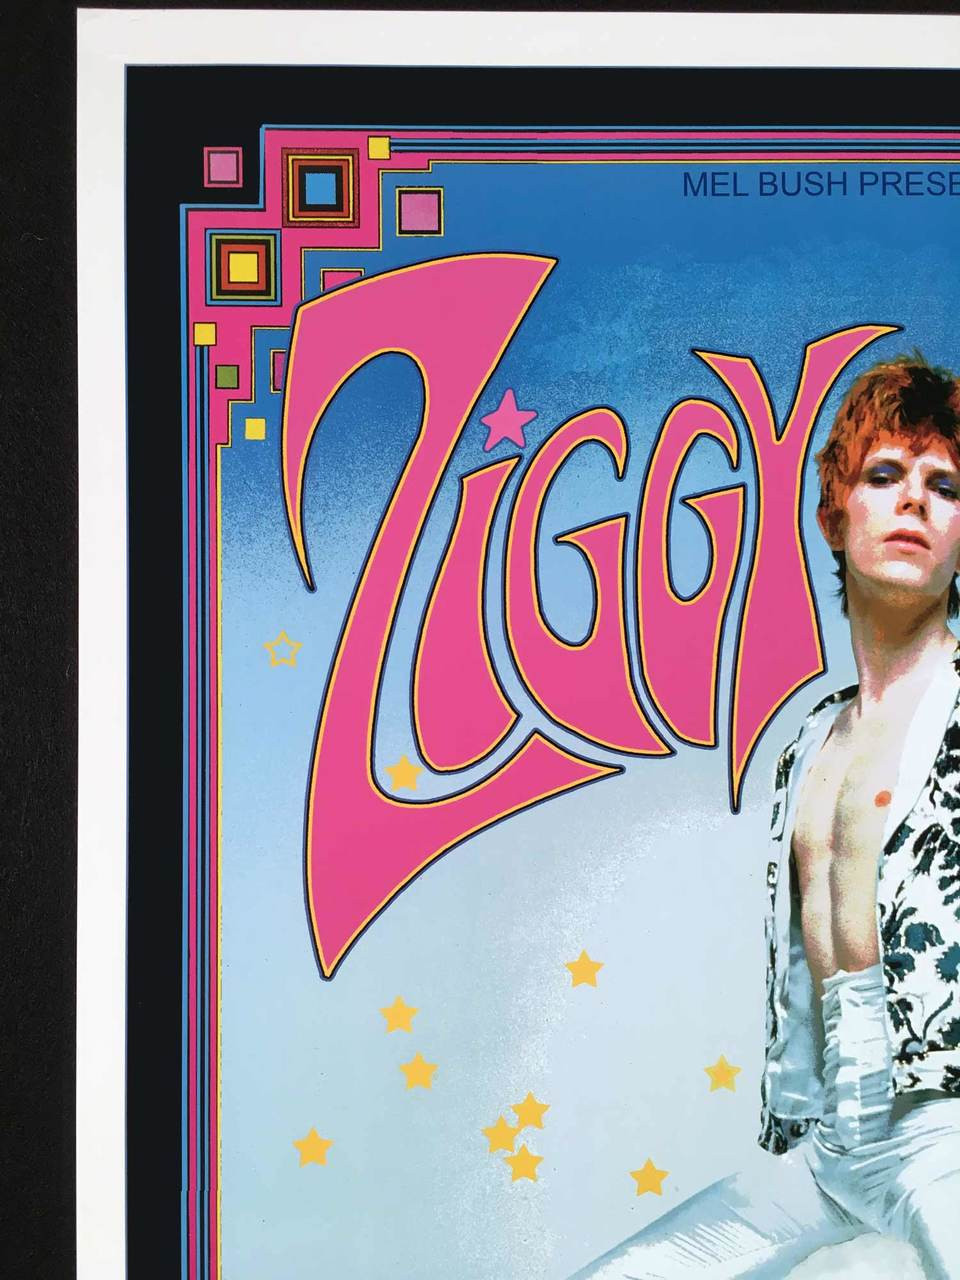 David Bowie ZIGGY STARDUST Poster Tribute to Historic 1972 Rainbow Theater Show 